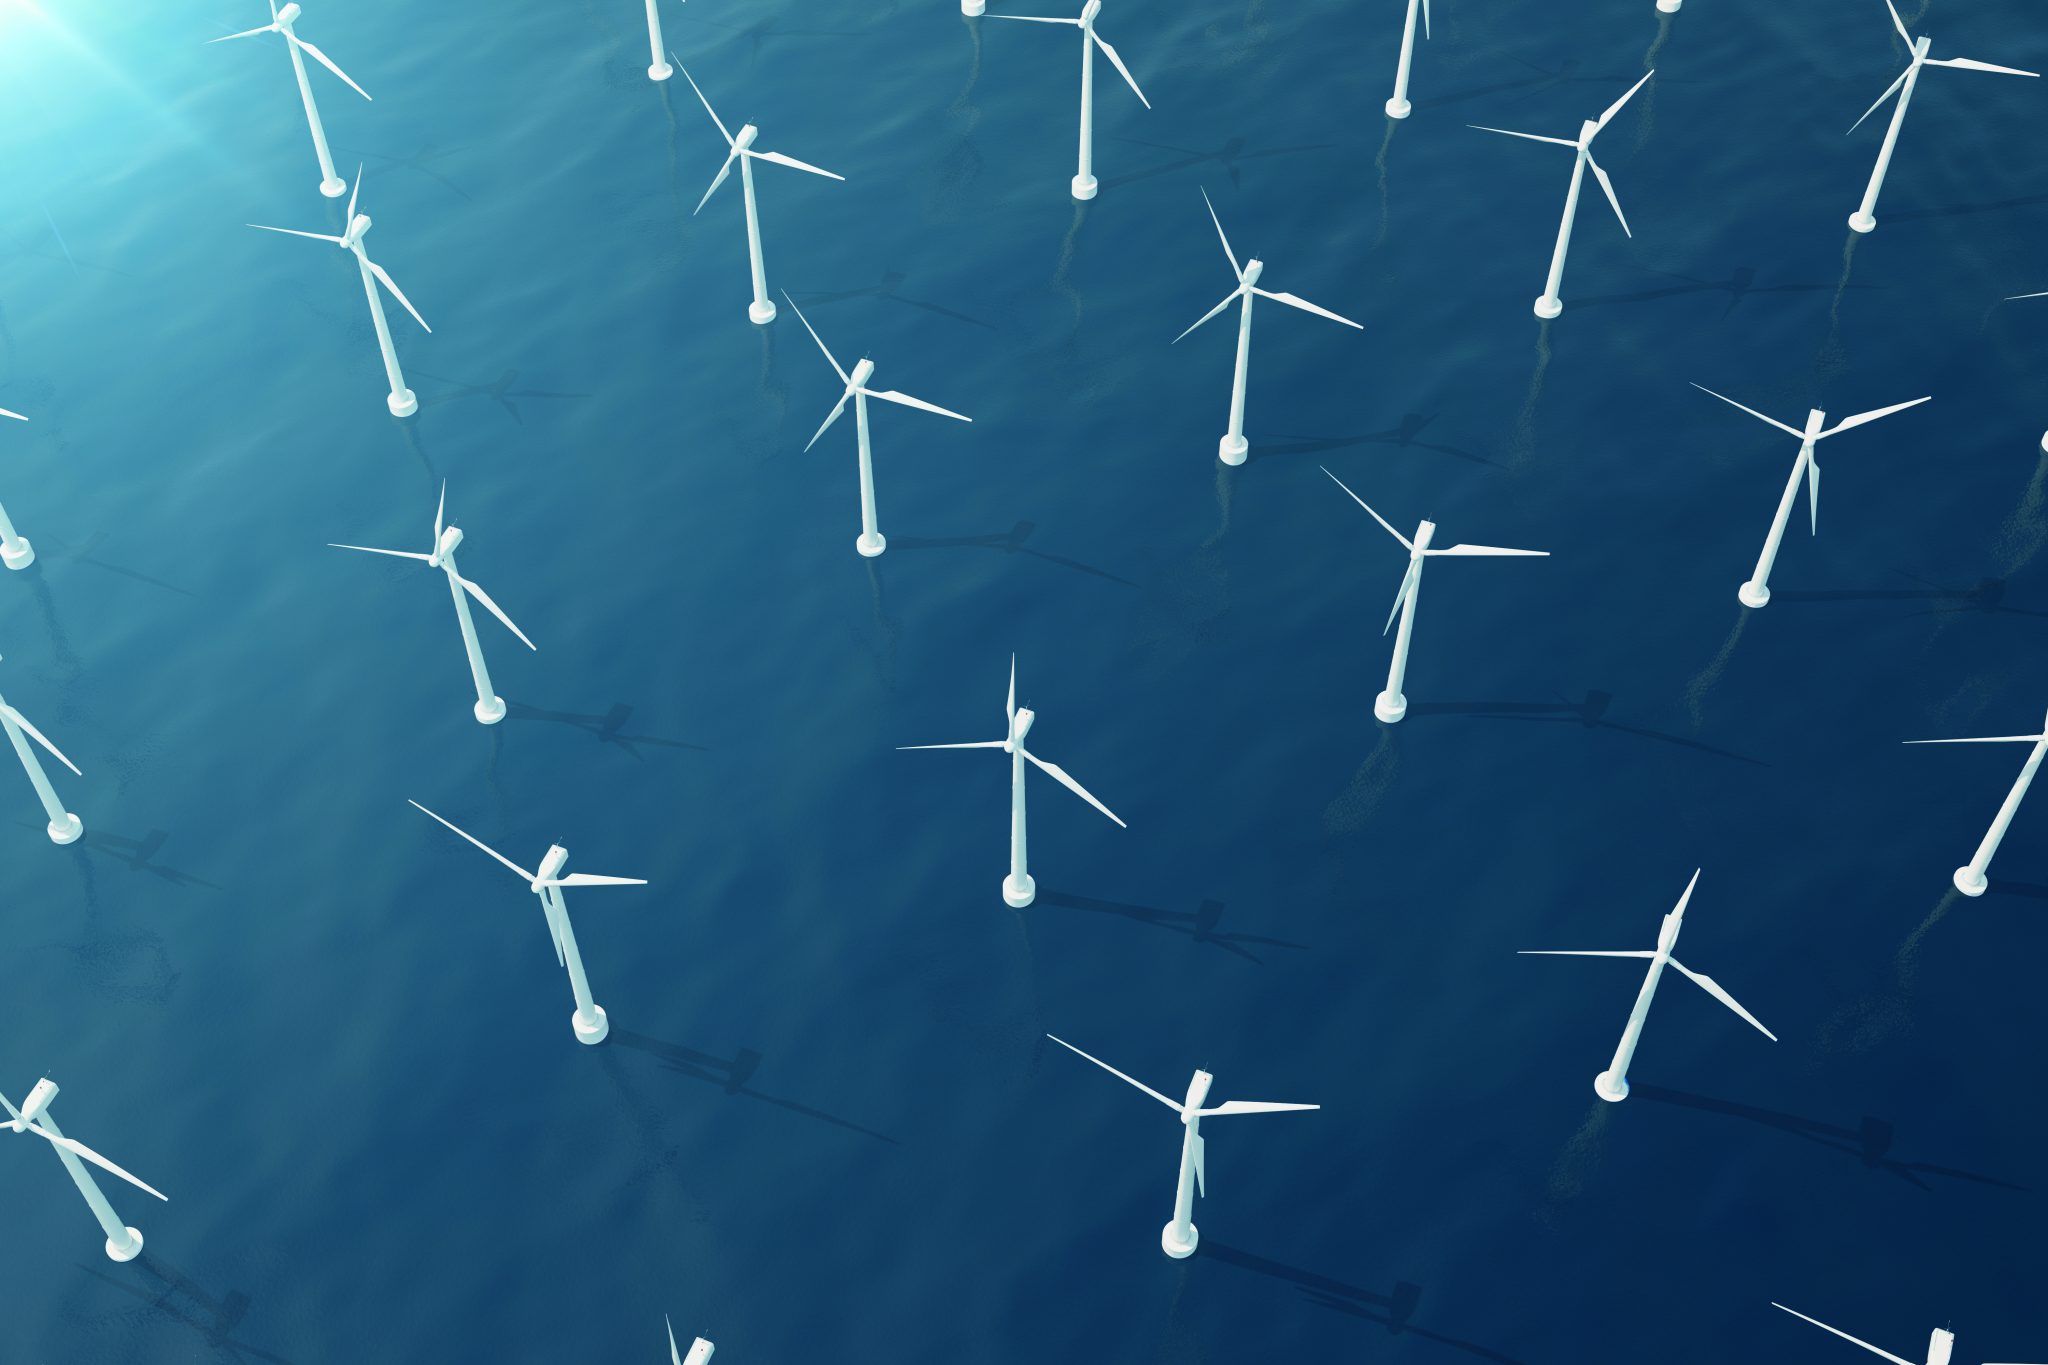 Elm Trading completes two renewable energy SPV acquisitions